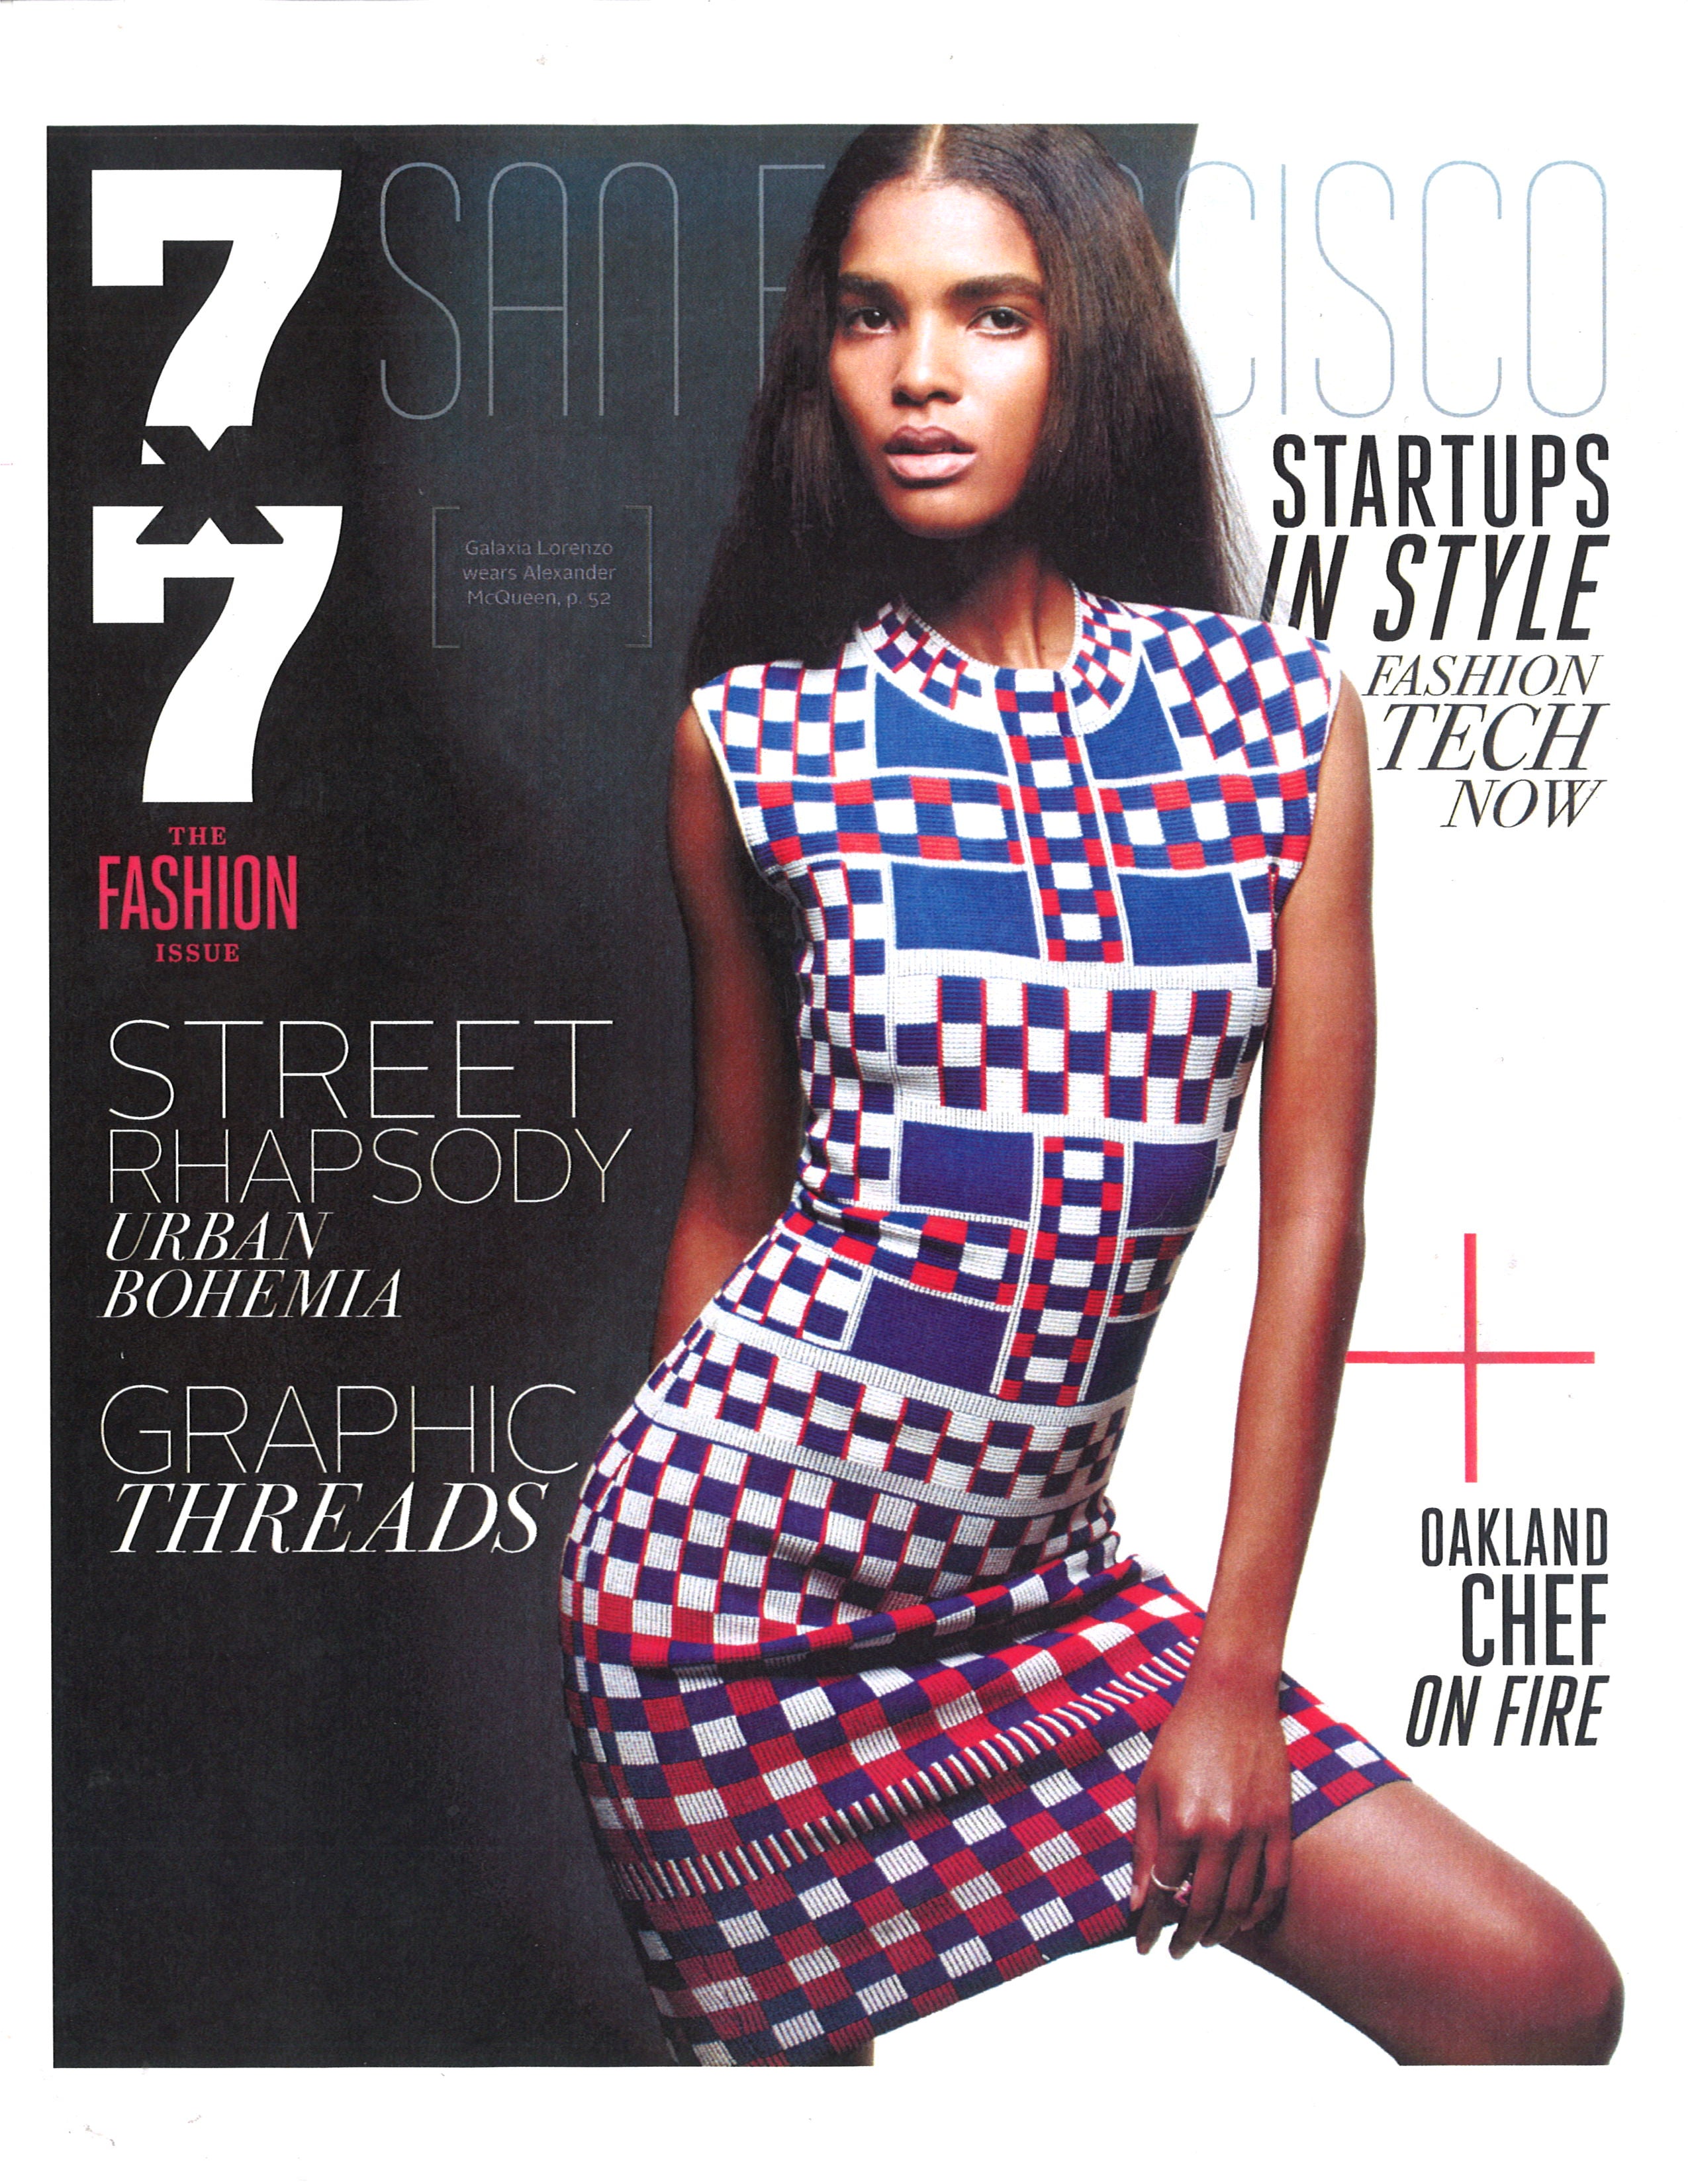 7x7 magazine cover with model